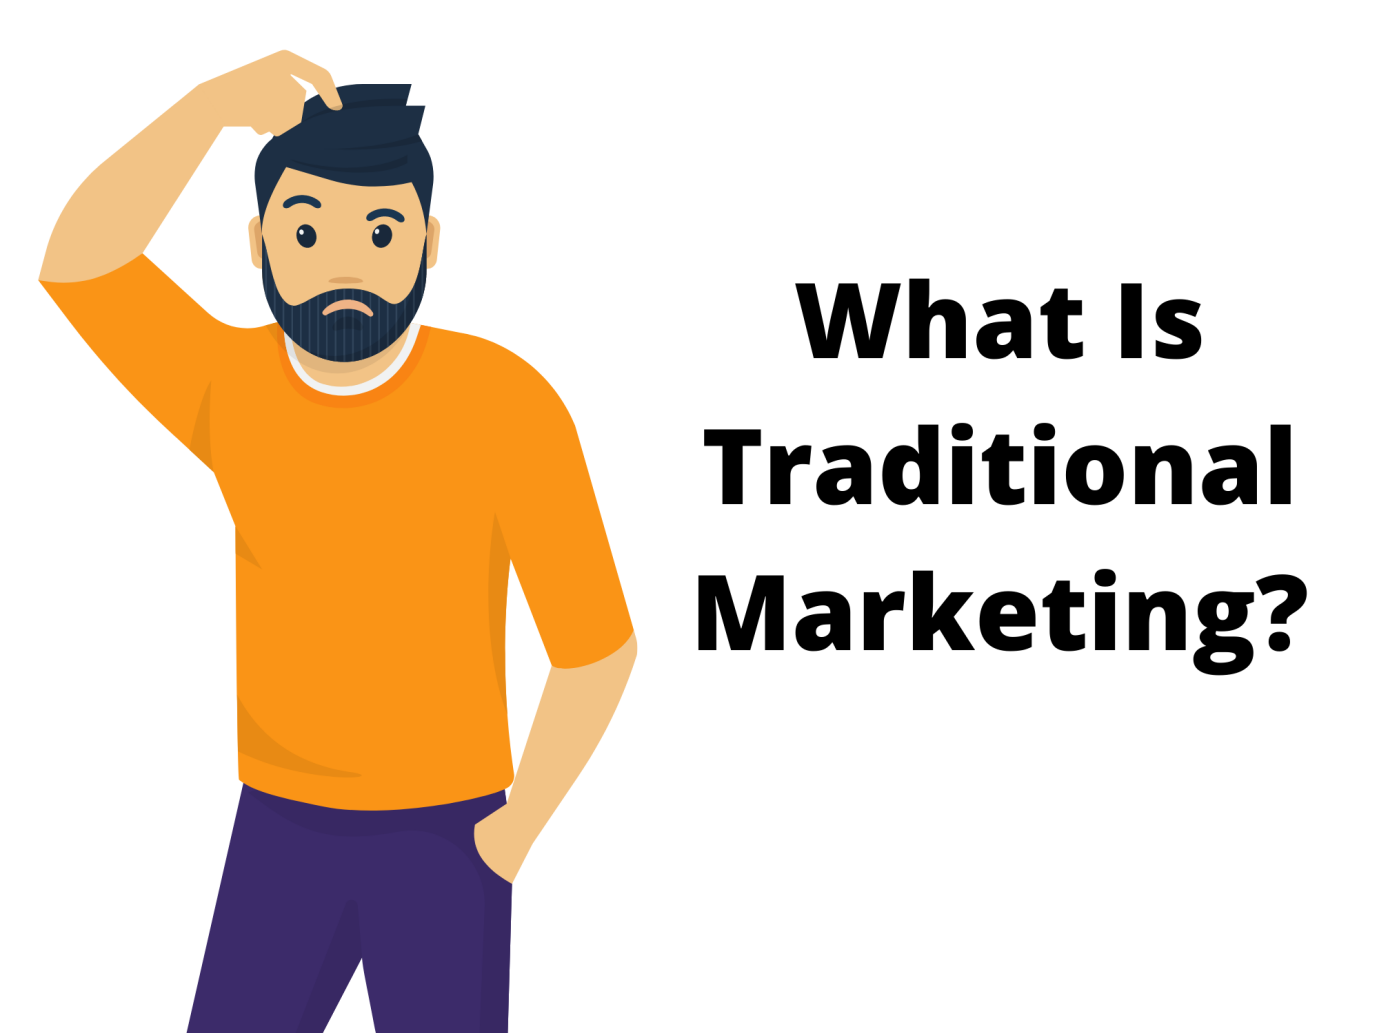 What Is Traditional Marketing?